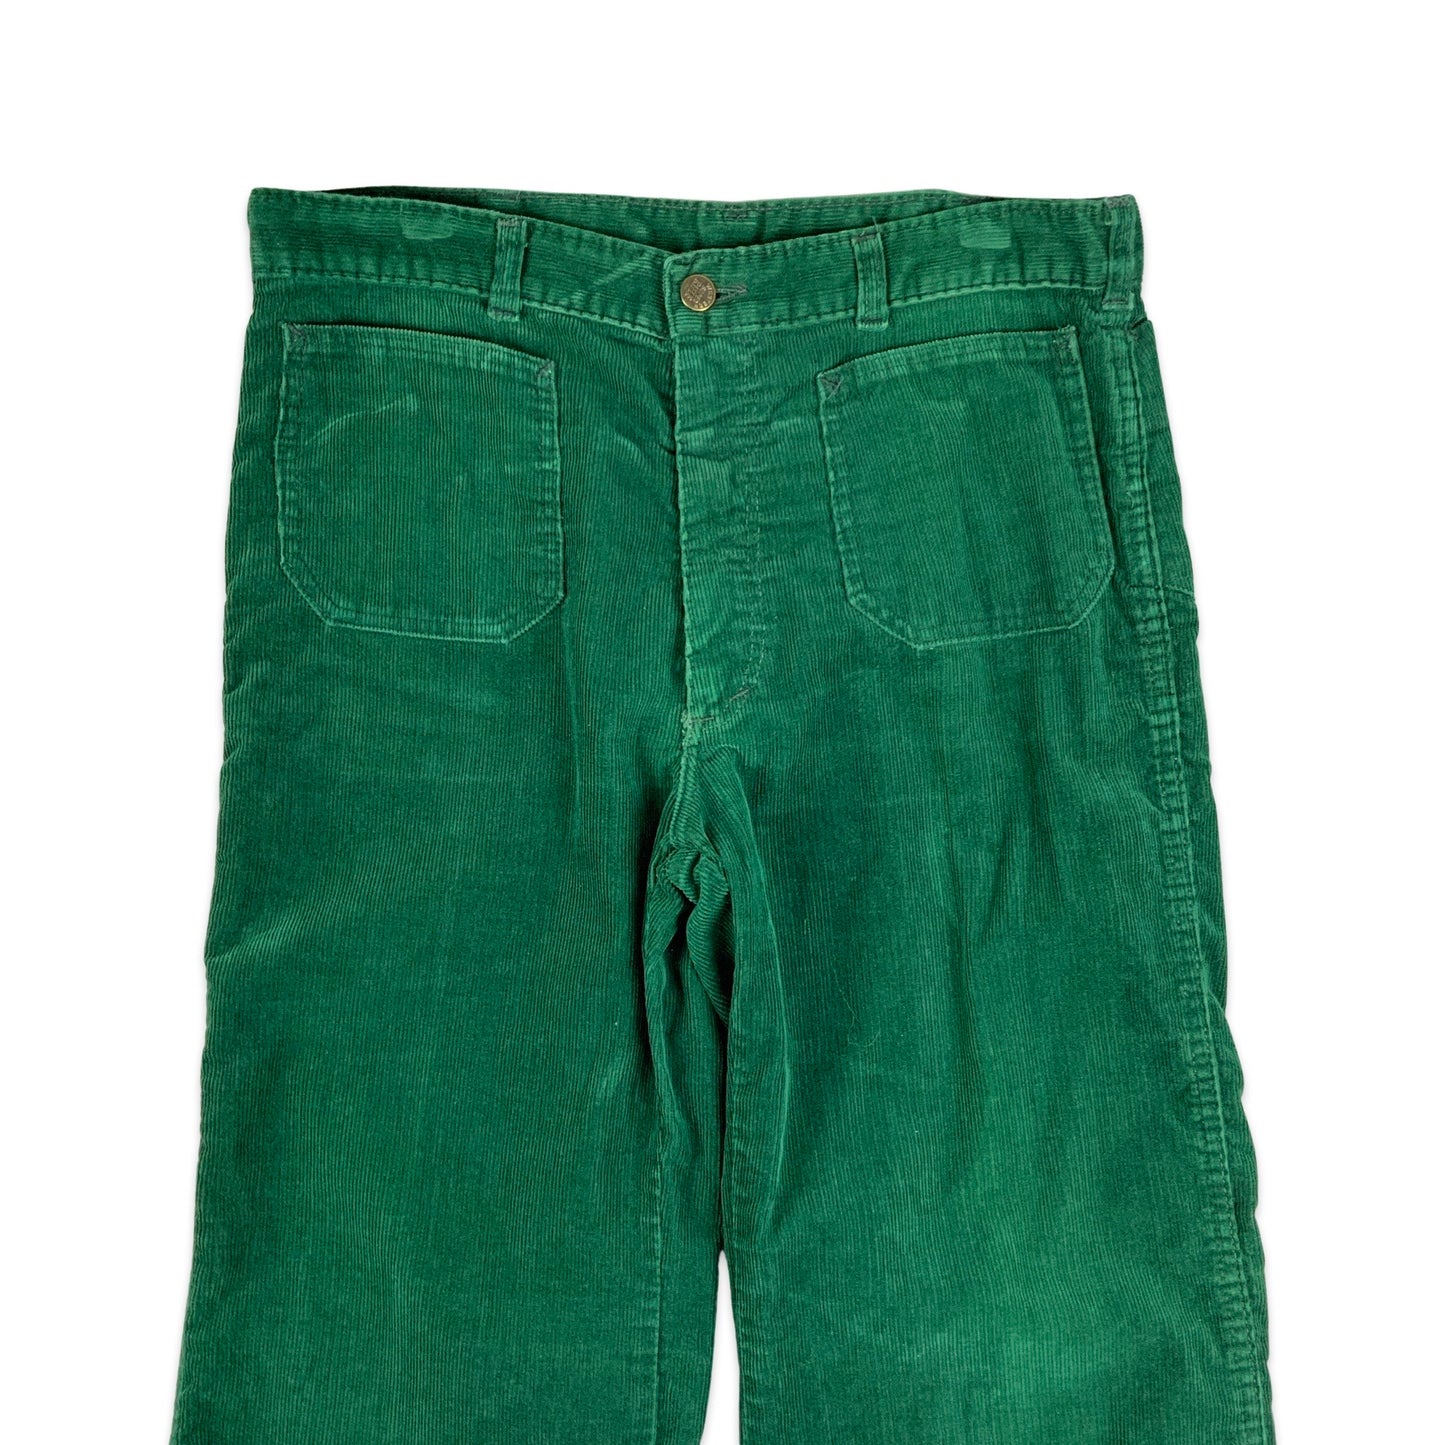 Vintage Green Flared Corduroy Trousers 33W 30L